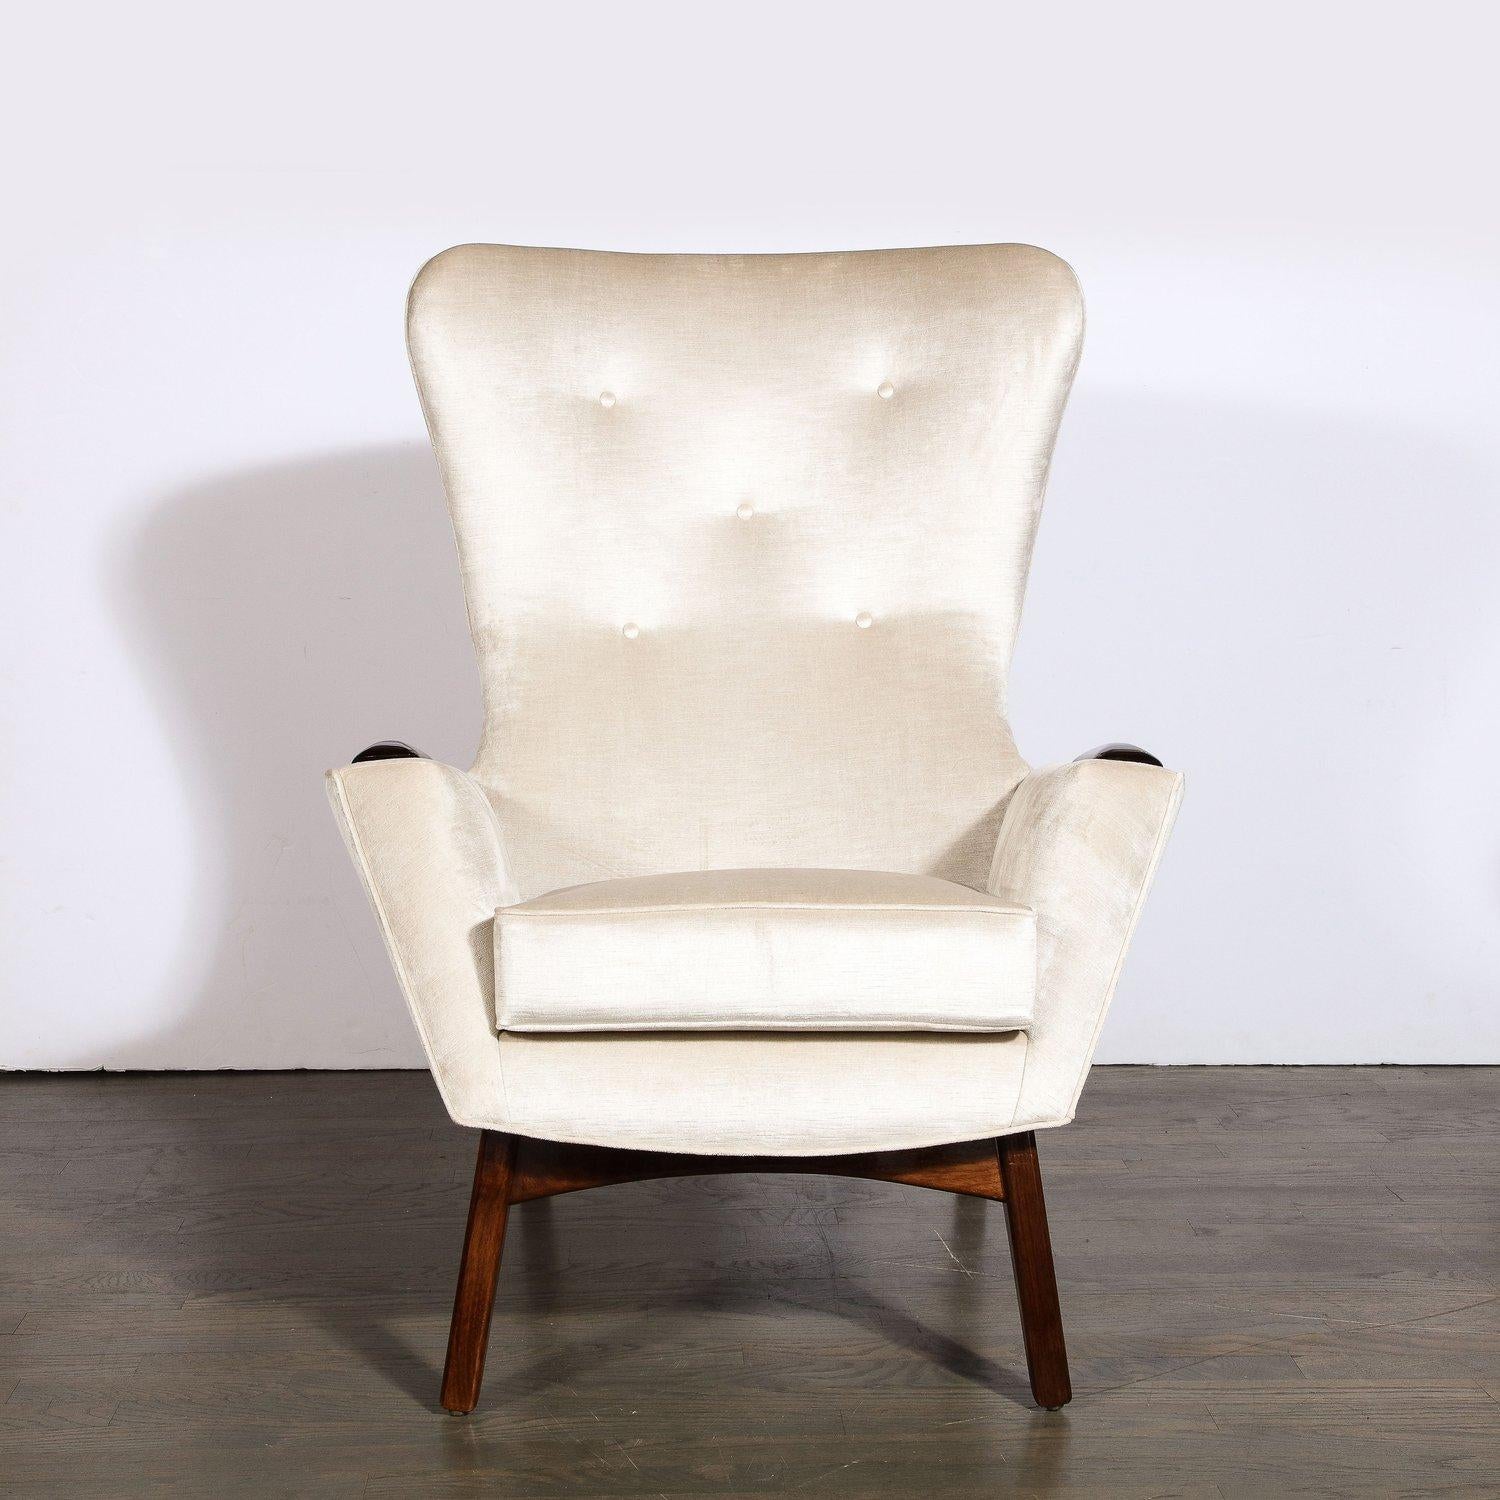 This beautiful Mid Century Modern chair was realized by the 20th century legend Adrian Pearsall in the United States circa 1960. It features a sculptural base consisting of angled back feet and front straight feet- connected via an hourglass form